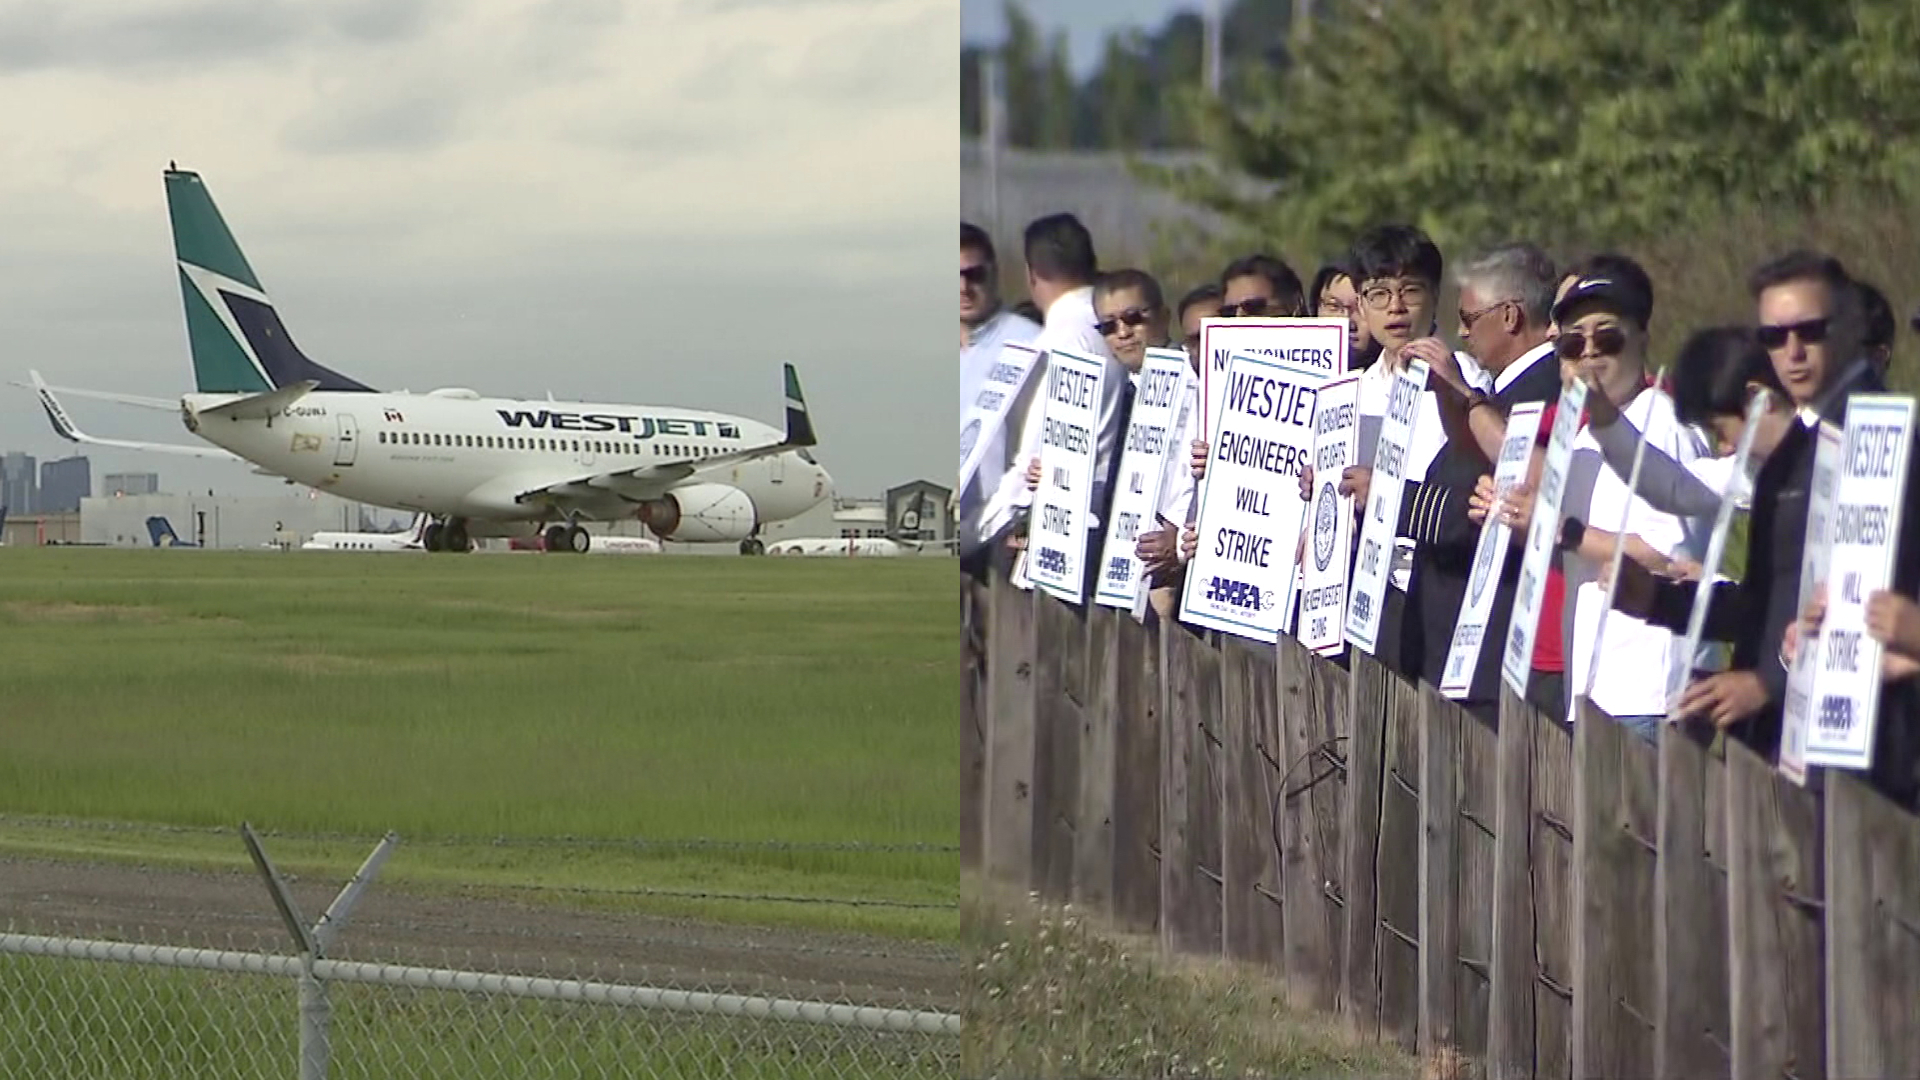 Thousands impacted by WestJet flight cancellations ahead of possible strike